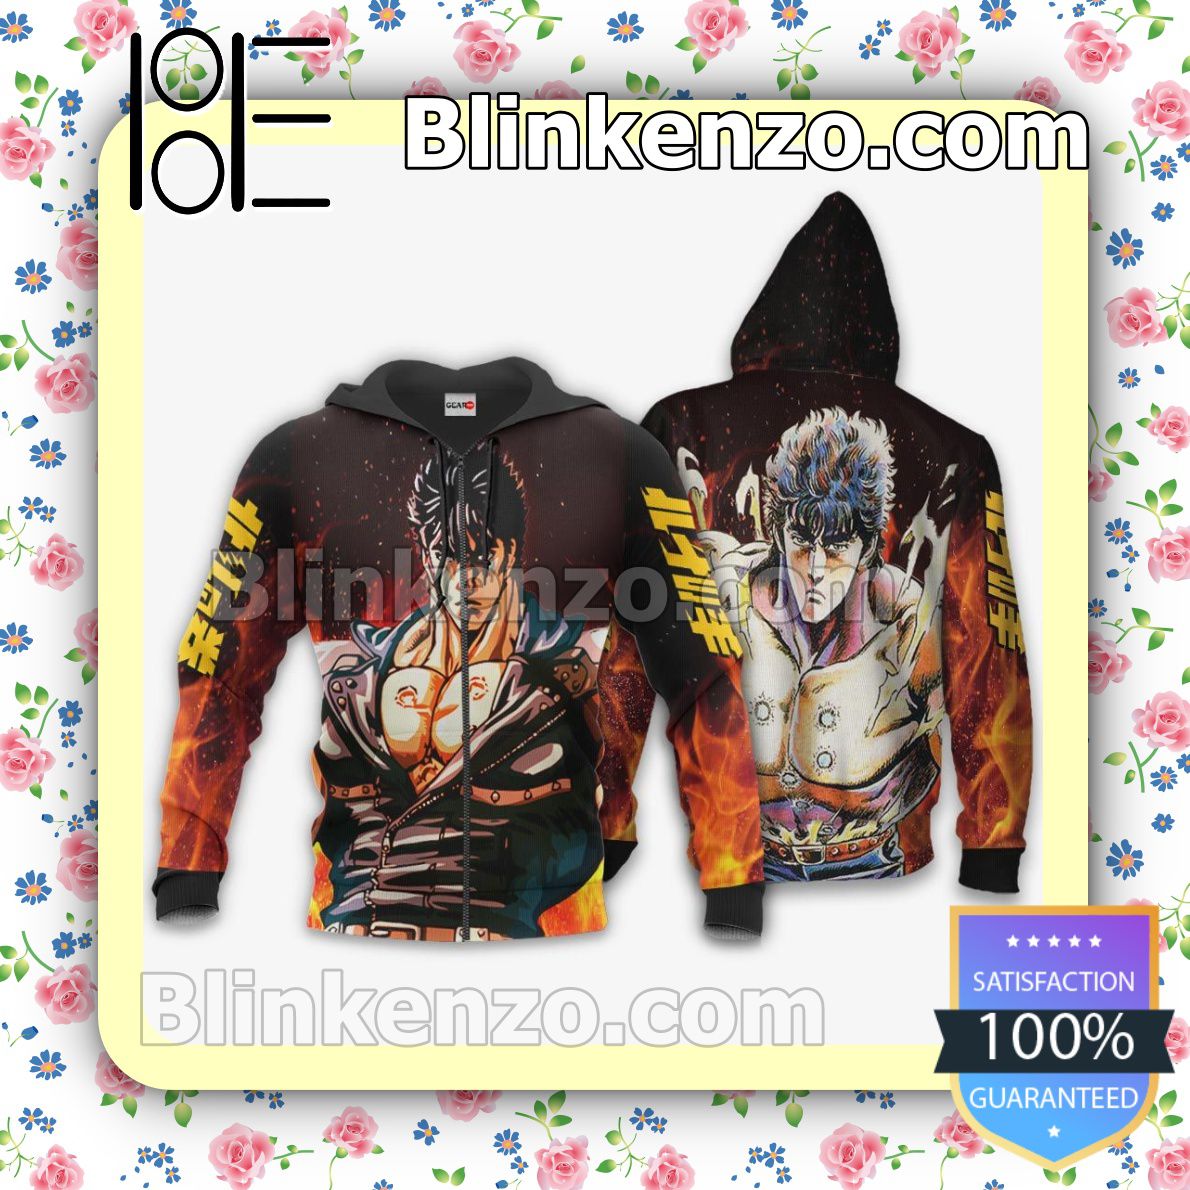 Fist of the North Star Custom Anime Personalized T-shirt, Hoodie, Long Sleeve, Bomber Jacket